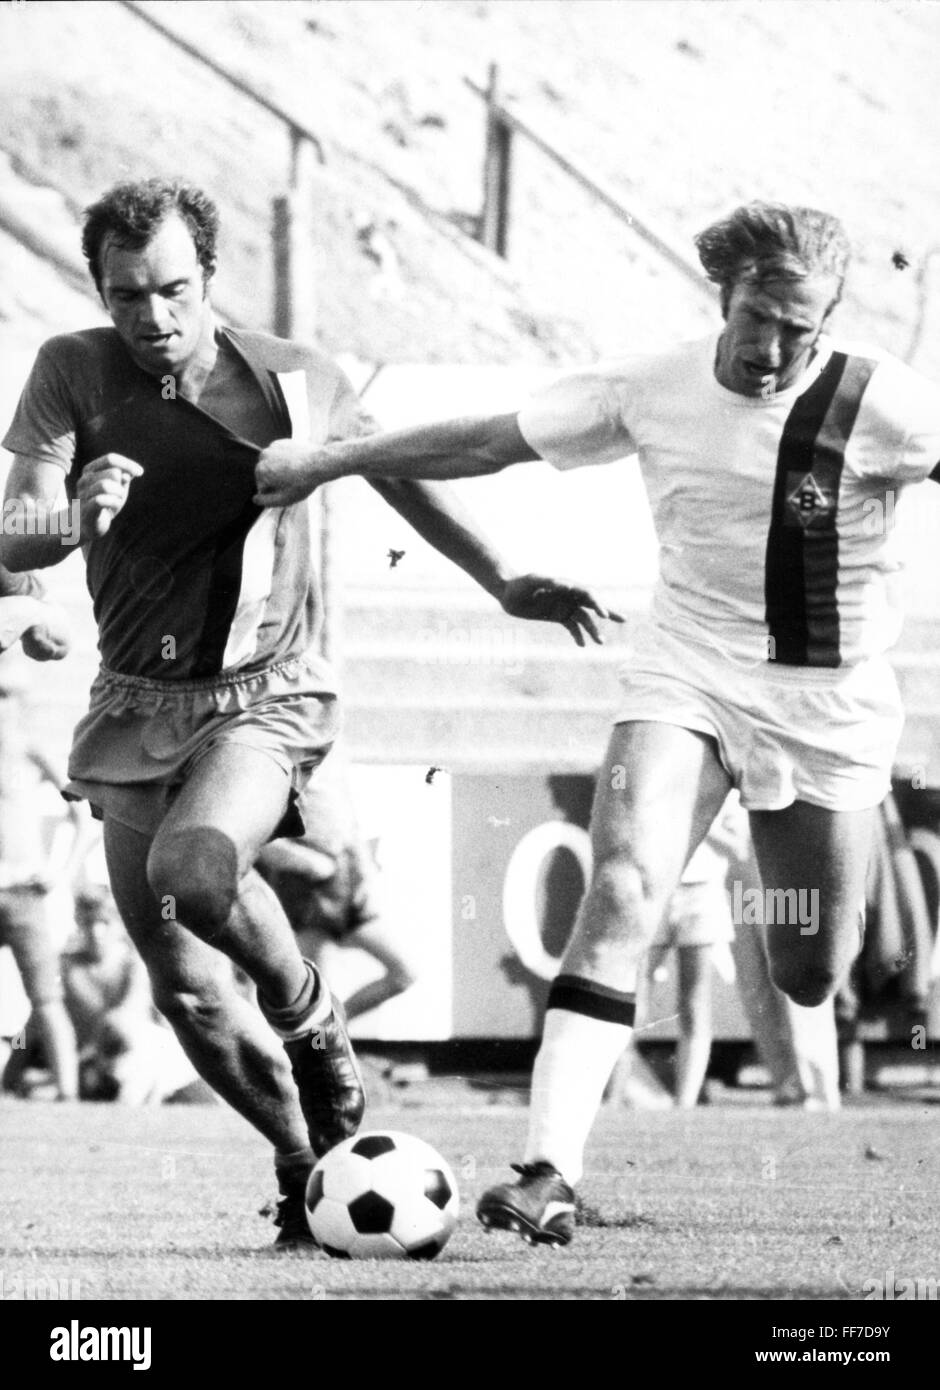 sports,football,game,Germany,national league,season 1971 / 1972,2nd match day,game Borussia Moenchengladbach versus Arminia Bielefeld(5:1),Boekelbergstadion,Moenchengladbach,21.8.1971,duel between Norbert Leopoldseder and Guenter Netzer,Bökelberg,football match,soccer match,football matches,athlete,athletes,football player,football players,footballer,footballers,kicker,player,players,ball,action,act,actions,acts,attack,offensive move,attacks,offensive moves,running,run,runs,playing,play,graps at the jersey,grab,grabbing,Additional-Rights-Clearences-Not Available Stock Photo